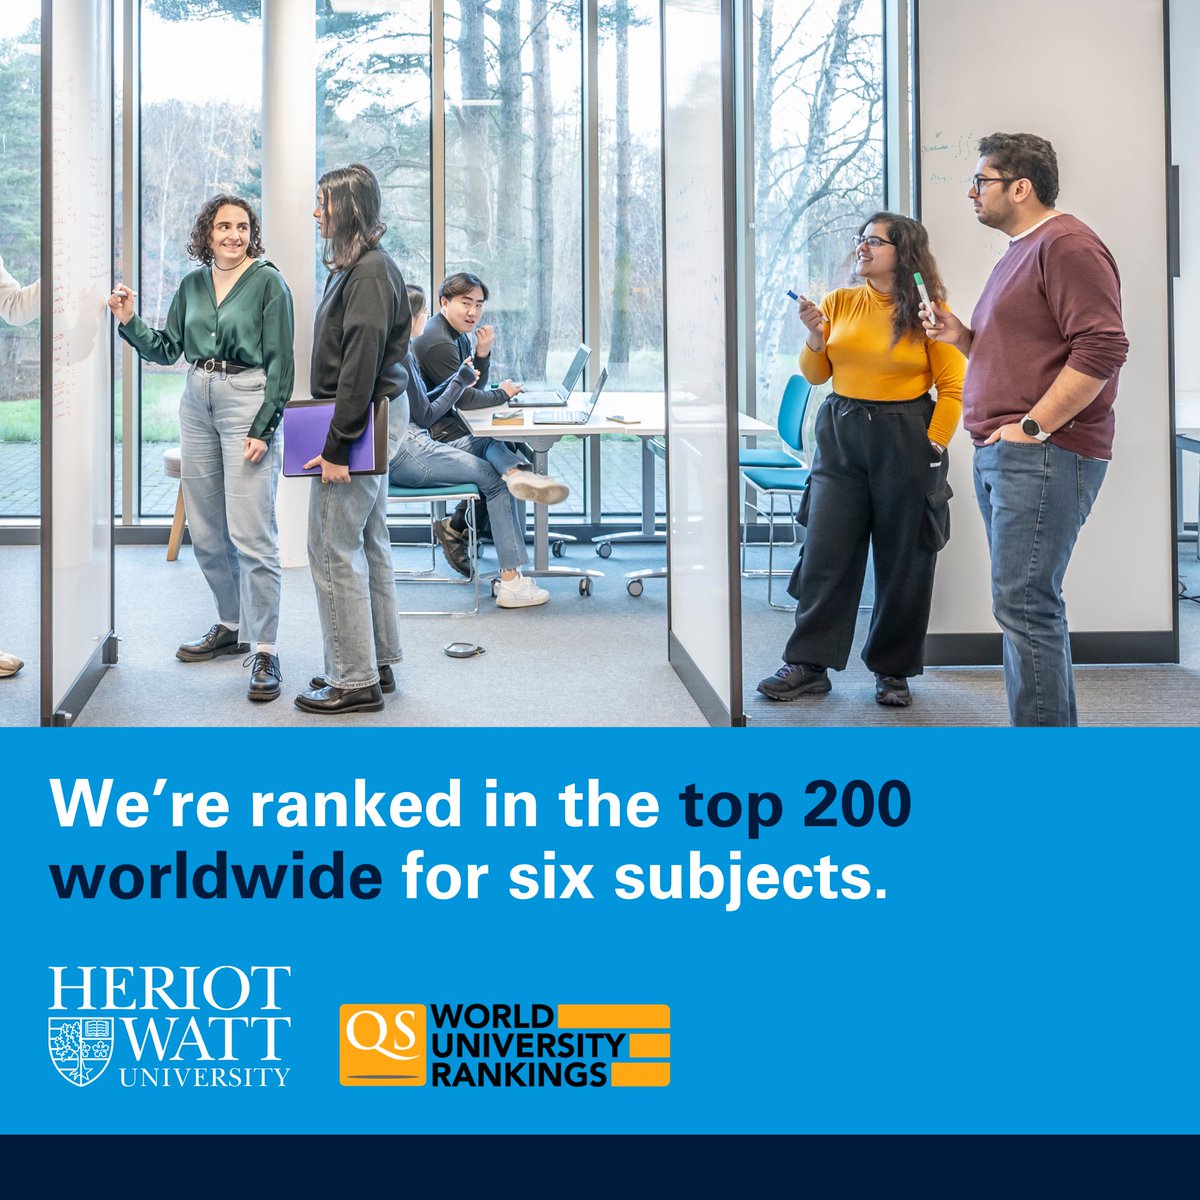 We're happy to announce that 6 of our subjects have ranked top 200 in the world by @worlduniranking: 🏗Civil Engineering 👨‍💼Business & Management Studies 🏠Architecture & Built Environment 🔢Mathematics ⚗️Petroleum Engineering 🥂Hospitality & Leisure Management #HeriotWattUni